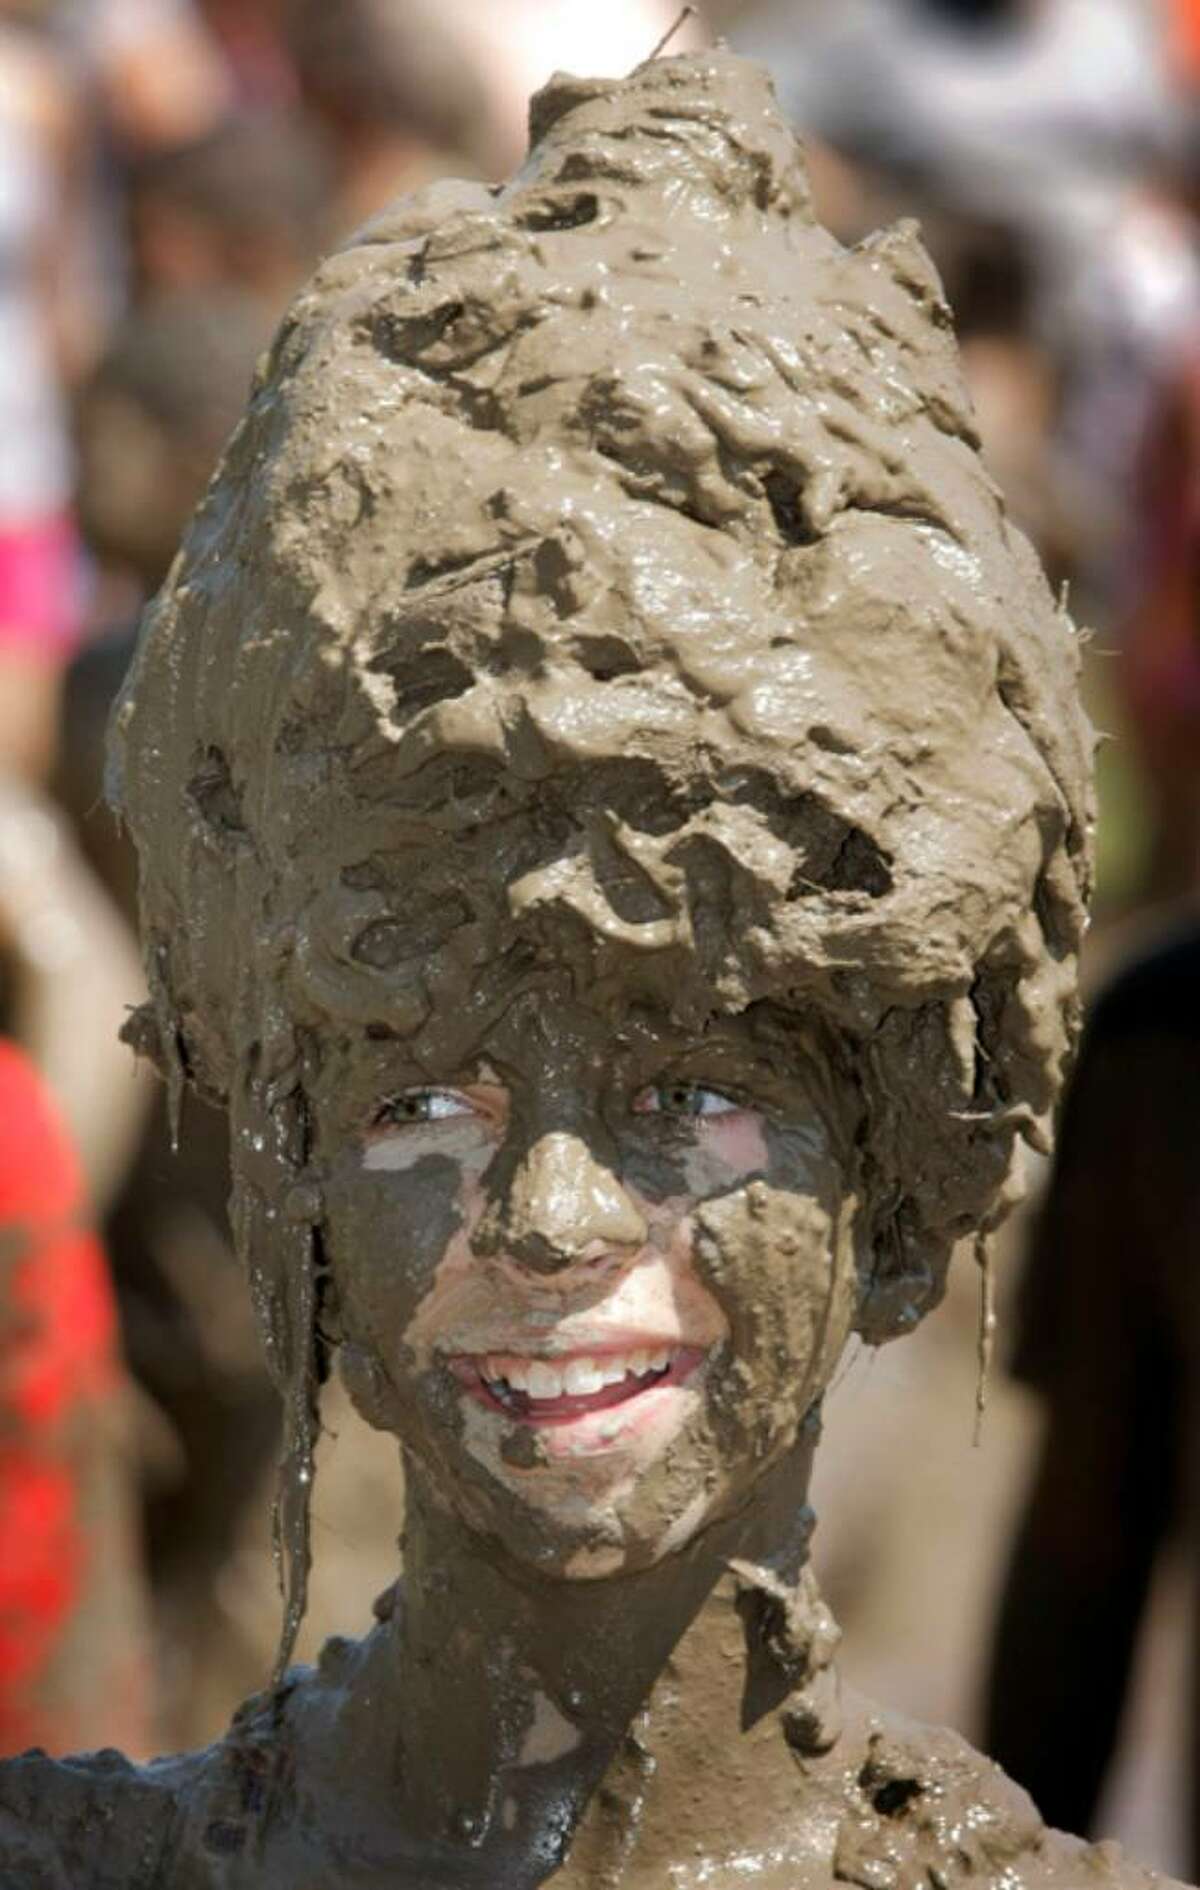 WESTLAND, MI - JULY 6: Logan Sibel, age 12, of Redford, Michigan gets some relief from the heat by playing in a gigantic lake of mud at the annual Mud Day event July 6, 2010 in Westland, Michigan. The lake was created by mixing approximately 20,000 gallons of water with 200 tons of topsoil. The event, which is sponsored by the Wayne County Parks Department, draws about 1,000 children each year. (Photo by Bill Pugliano/Getty Images) *** Local Caption *** Logan Sibel